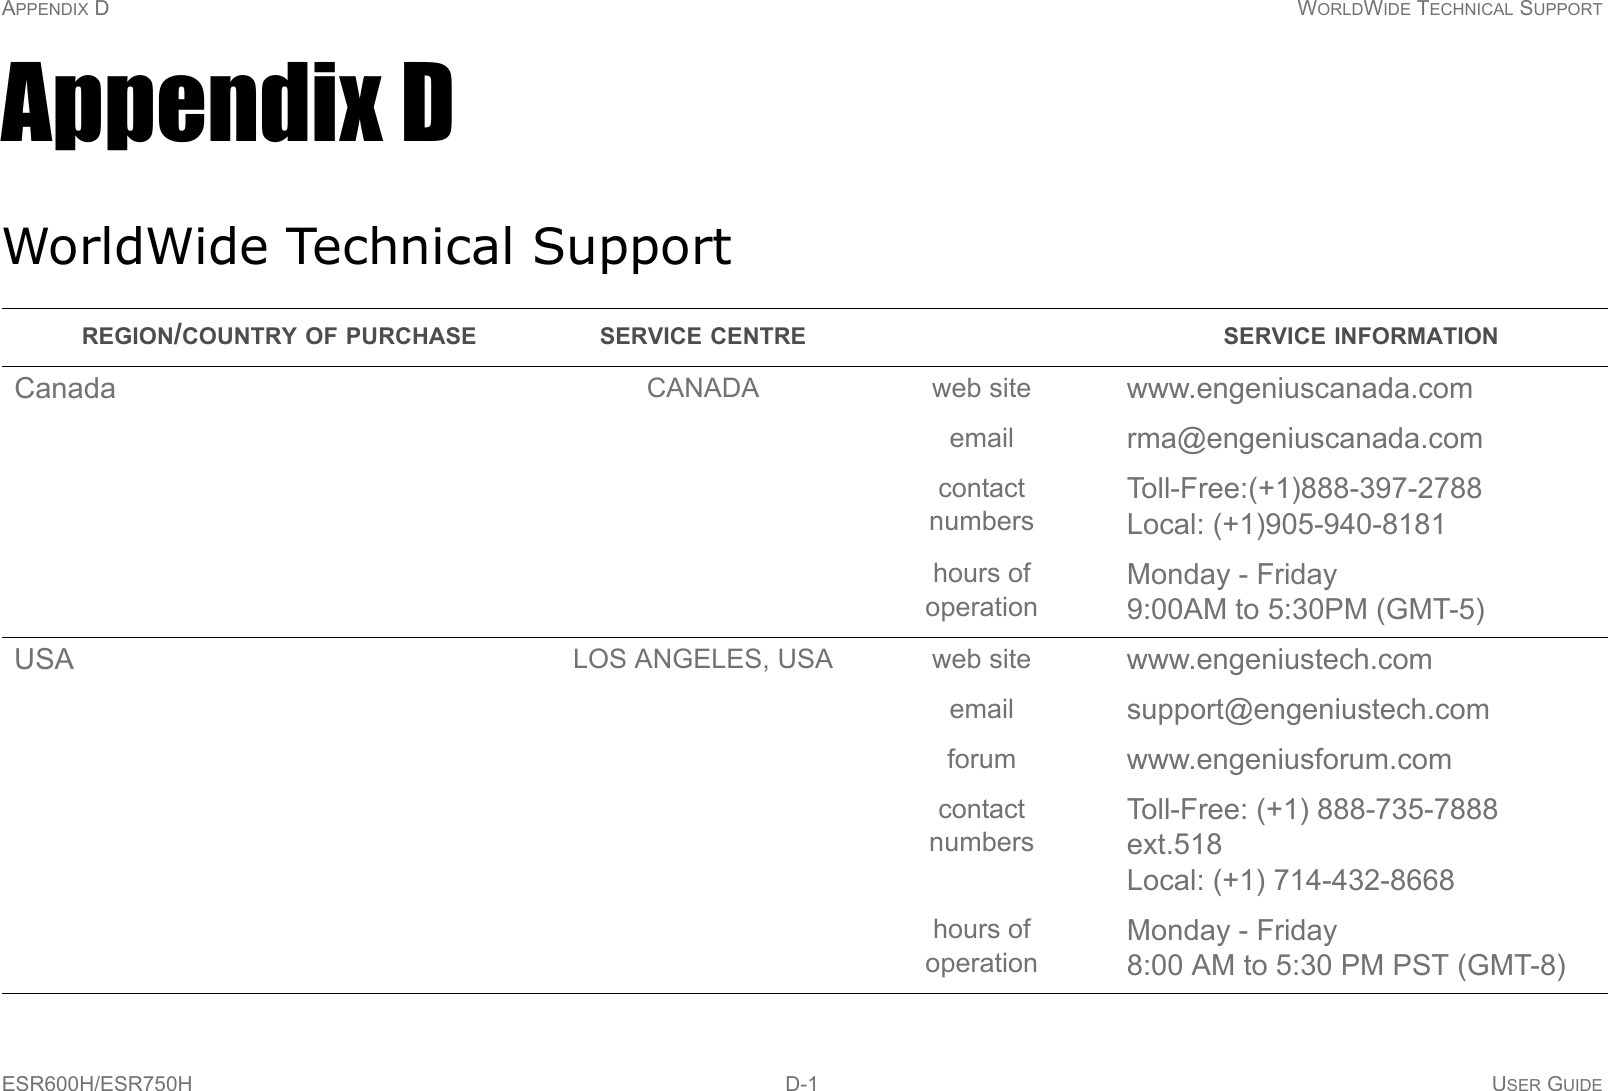 APPENDIX D WORLDWIDE TECHNICAL SUPPORTESR600H/ESR750H D-1 USER GUIDEAppendix DWorldWide Technical SupportREGION/COUNTRY OF PURCHASE SERVICE CENTRE SERVICE INFORMATIONCanada CANADA web site www.engeniuscanada.comemail rma@engeniuscanada.comcontactnumbersToll-Free:(+1)888-397-2788Local: (+1)905-940-8181hours of operationMonday - Friday9:00AM to 5:30PM (GMT-5)USA LOS ANGELES, USA web site www.engeniustech.comemail support@engeniustech.comforum www.engeniusforum.comcontactnumbersToll-Free: (+1) 888-735-7888 ext.518Local: (+1) 714-432-8668hours of operationMonday - Friday8:00 AM to 5:30 PM PST (GMT-8)